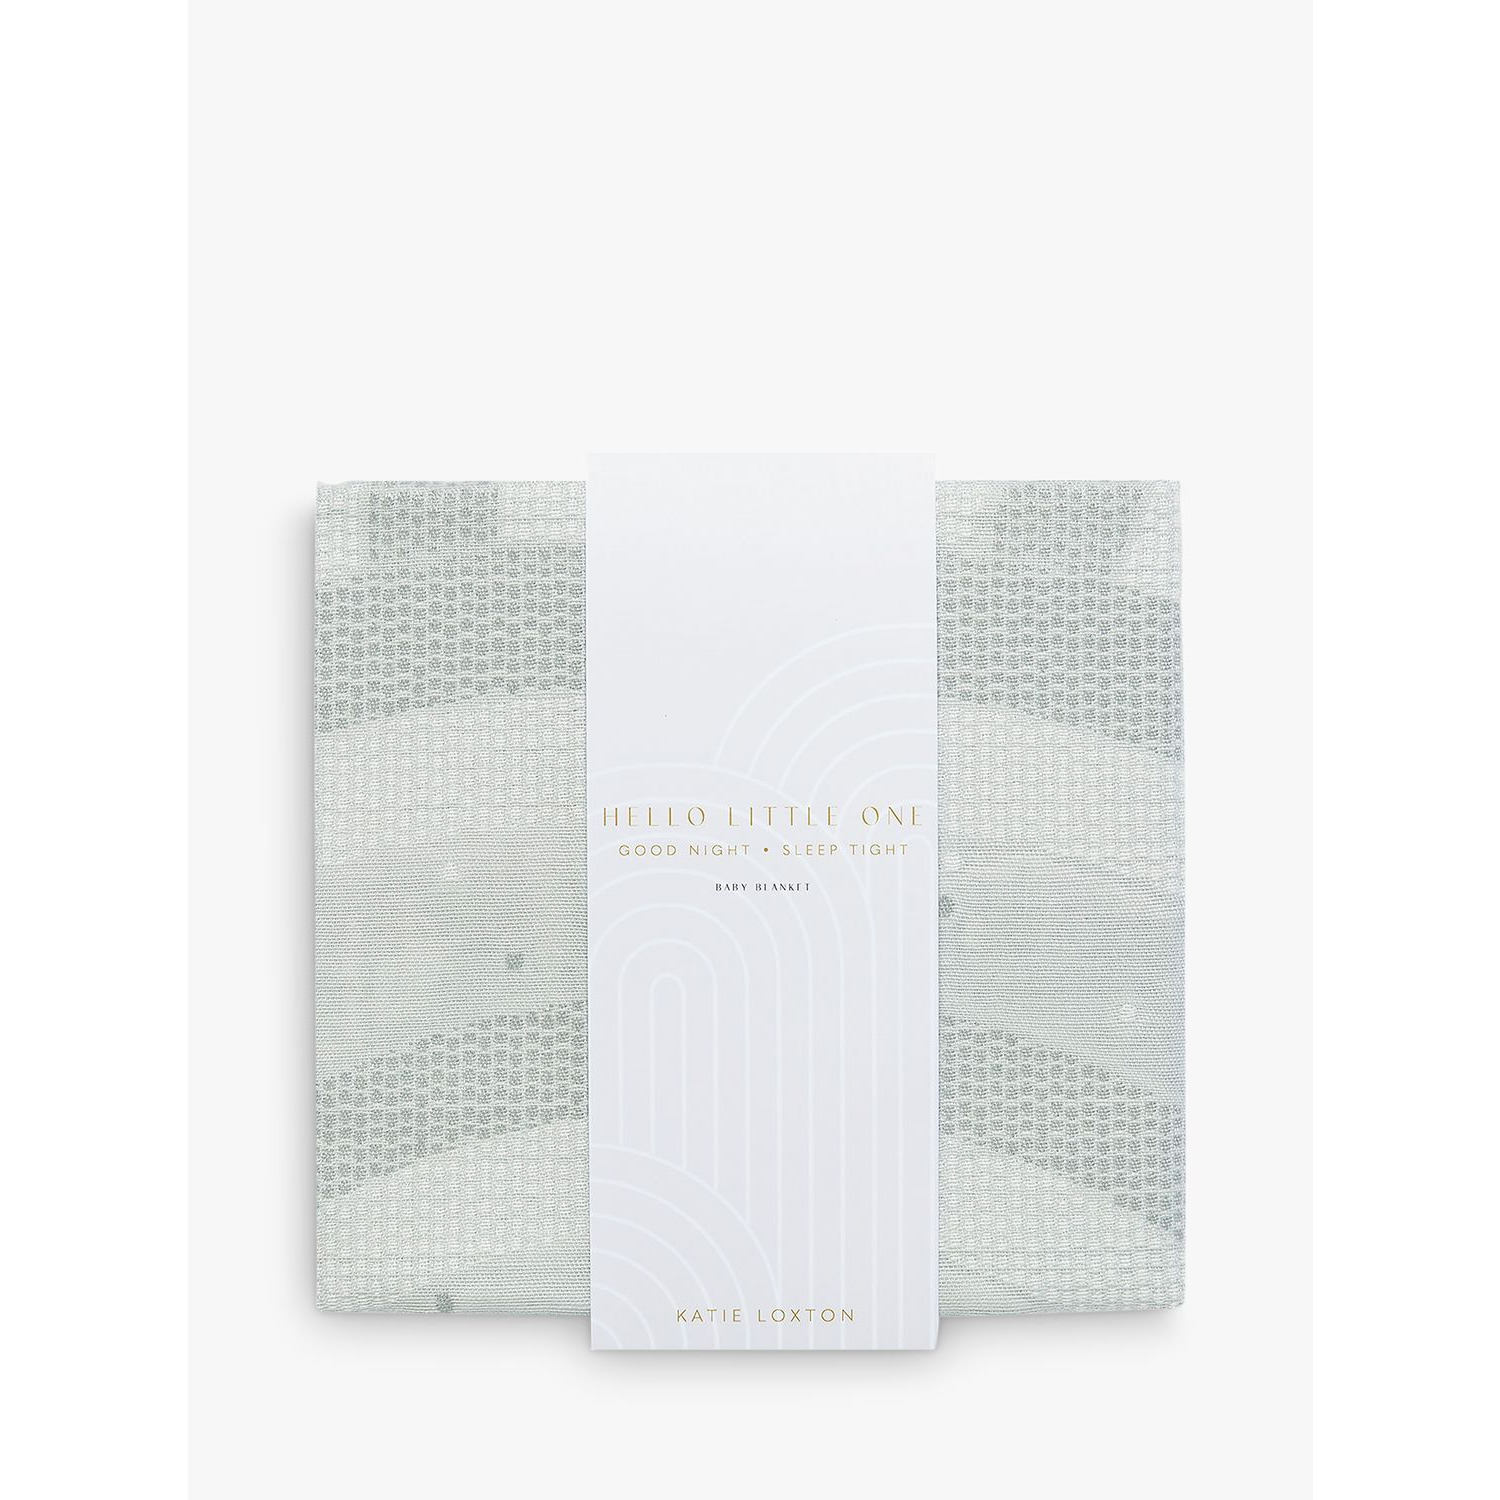 Katie Loxton Hello Little One Knitted Baby Blanket - image 1